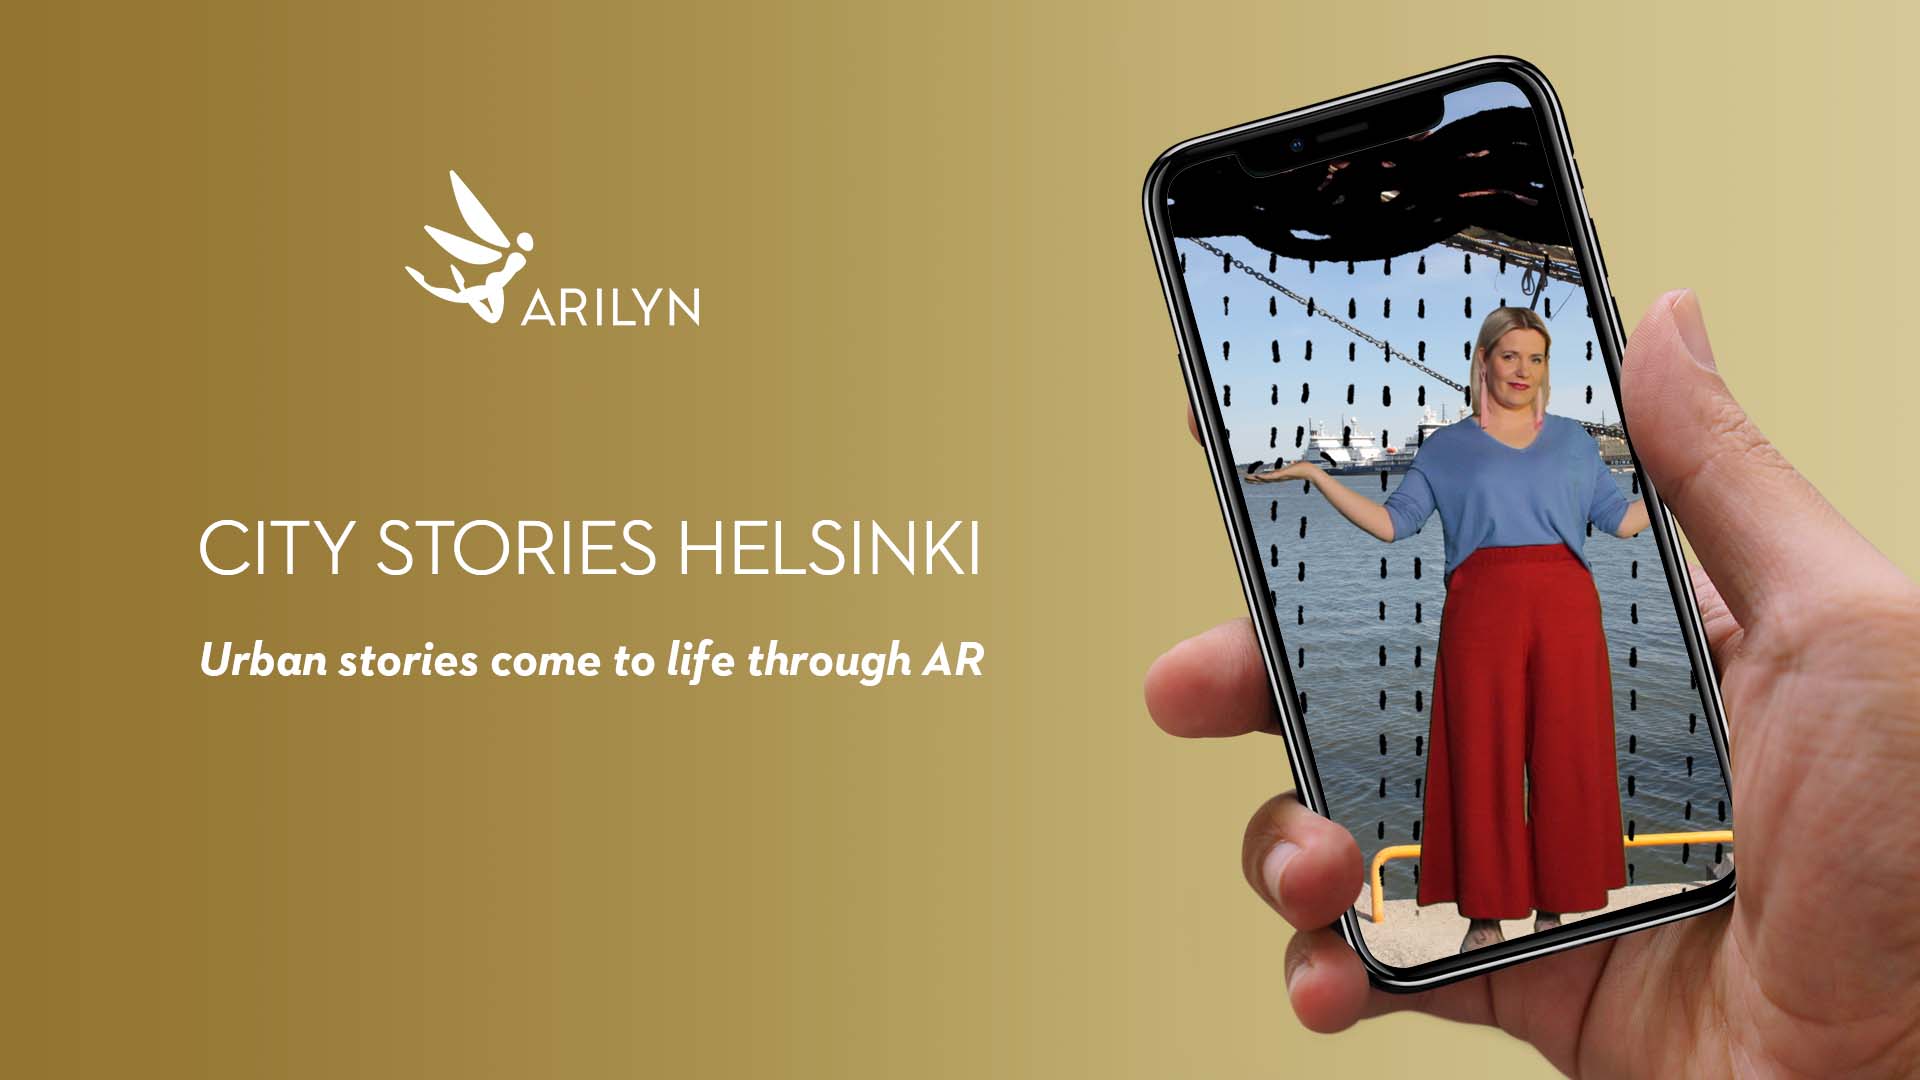 Urban Helsinki stories come to life with augmented reality